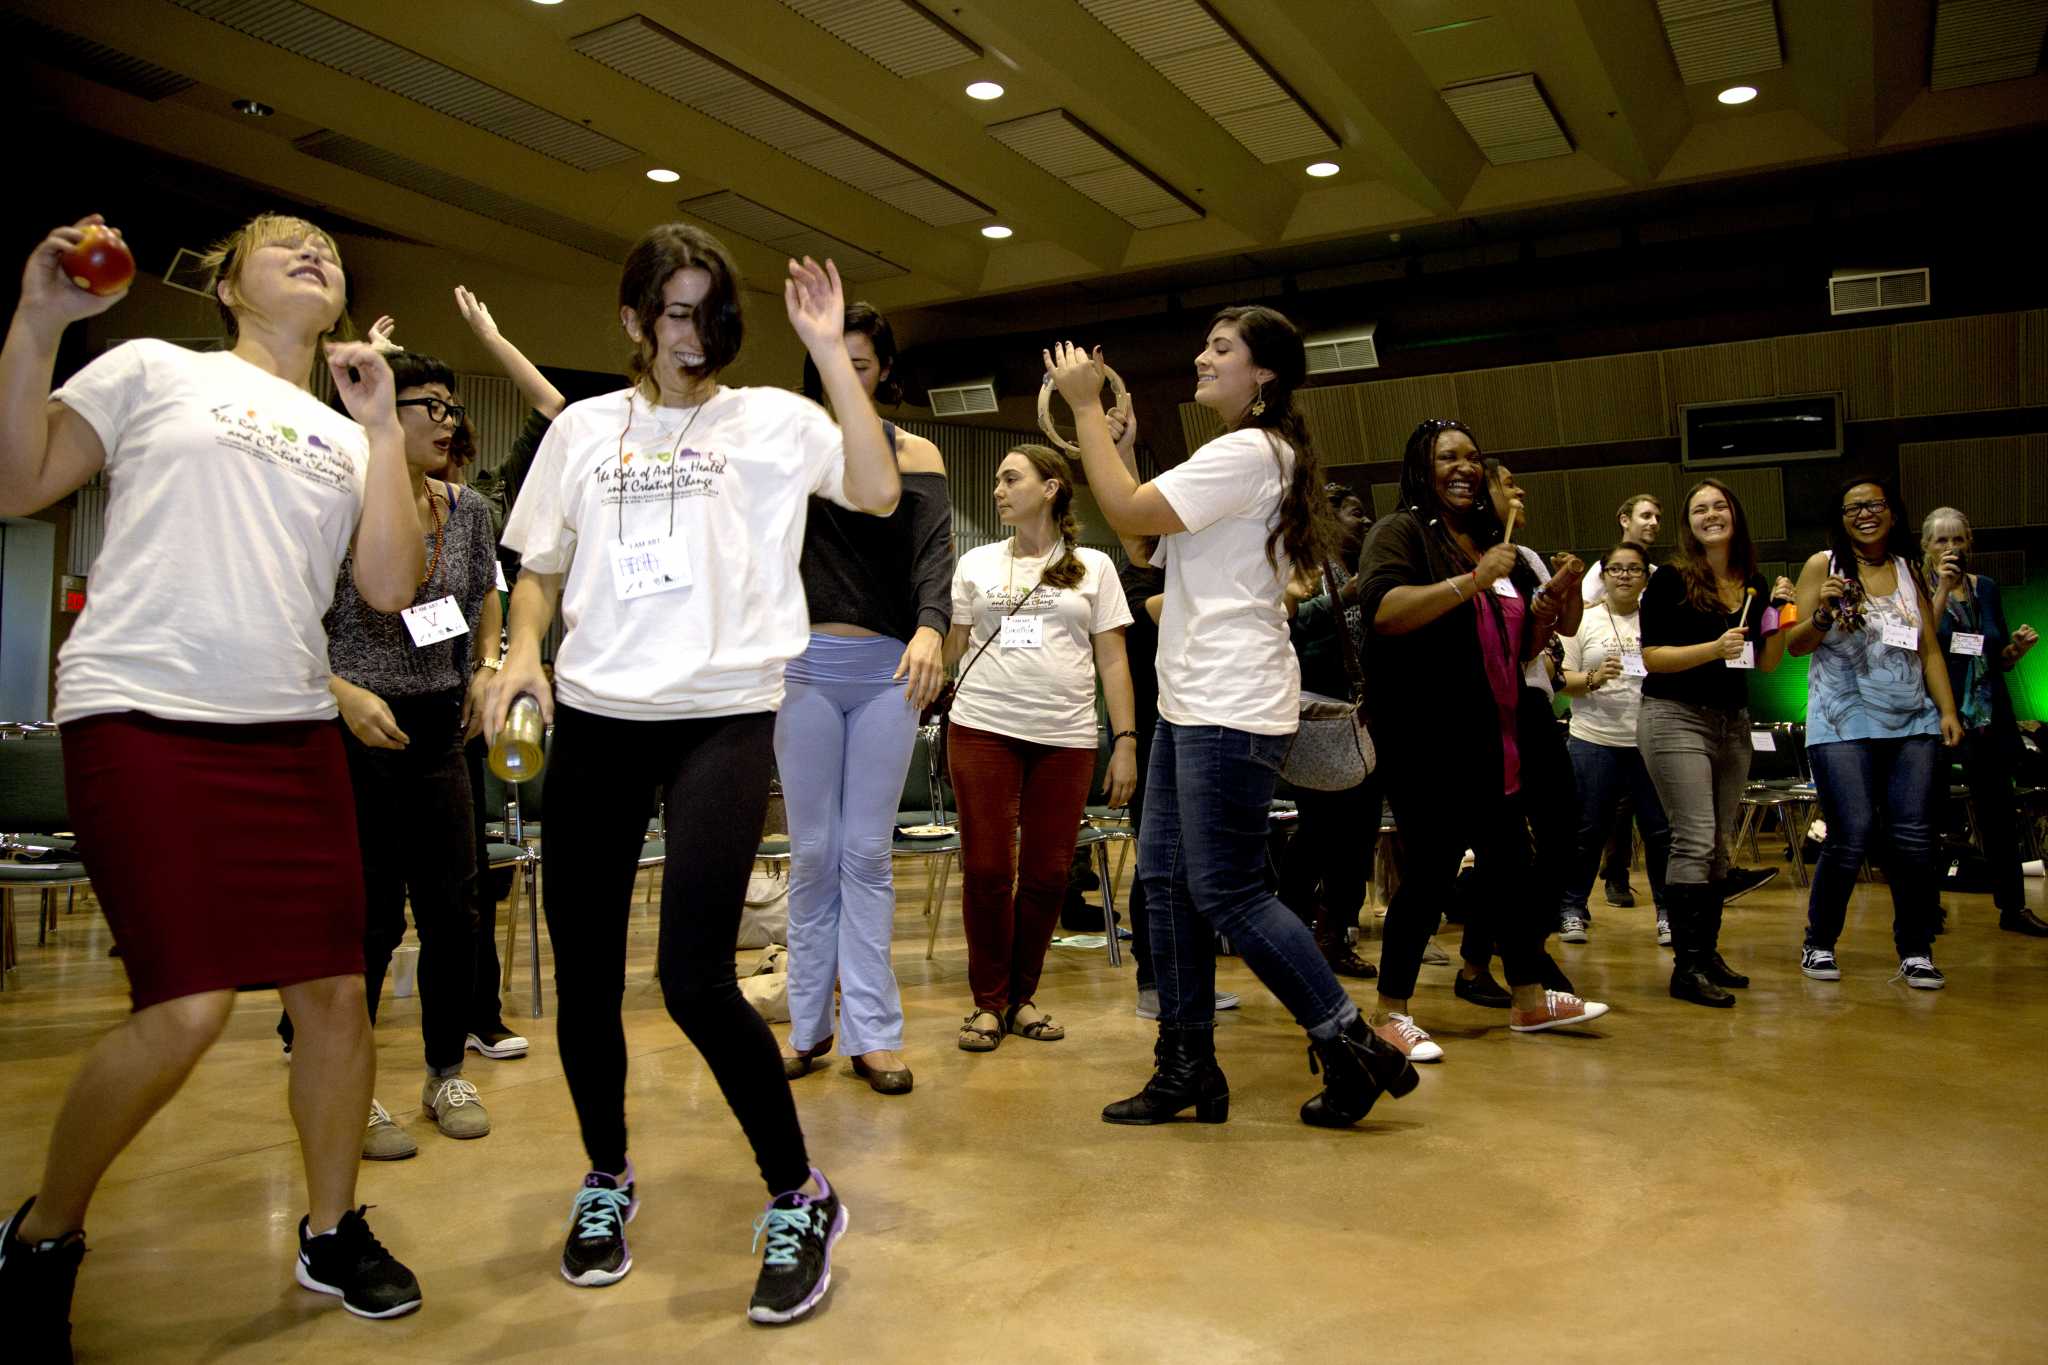 SF State students dance in celebration of the role of art in health and creative change at the Future of Healthcare Conference 2014 in Jack Adams Hall Saturday, Nov. 8, 2014. Emma Chiang/Special to Xpress